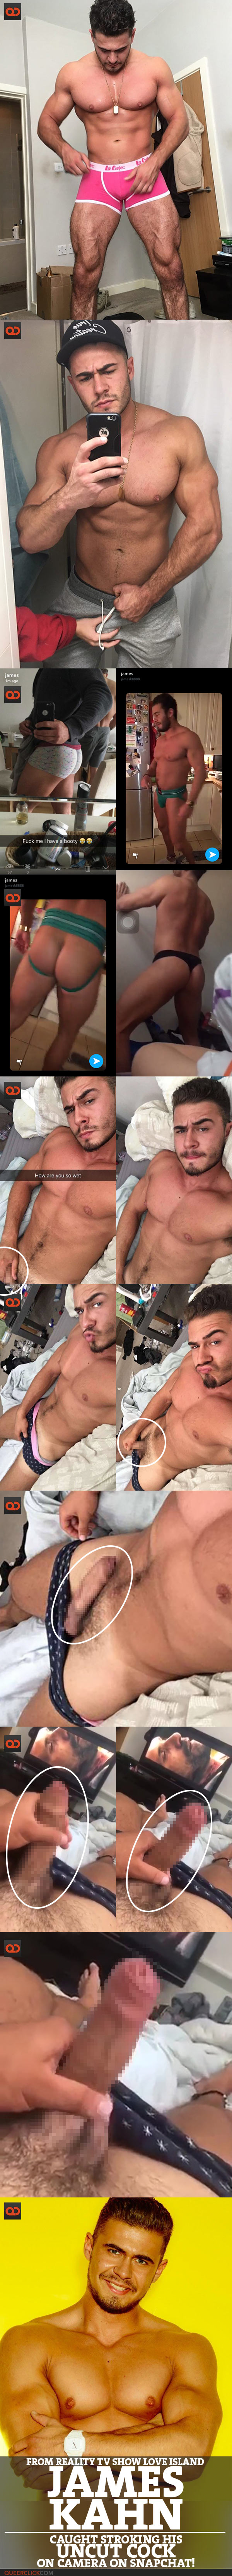 James Kahn, From Reality TV Show Love Island, Caught Stroking His Uncut Cock On Camera On Snapchat!